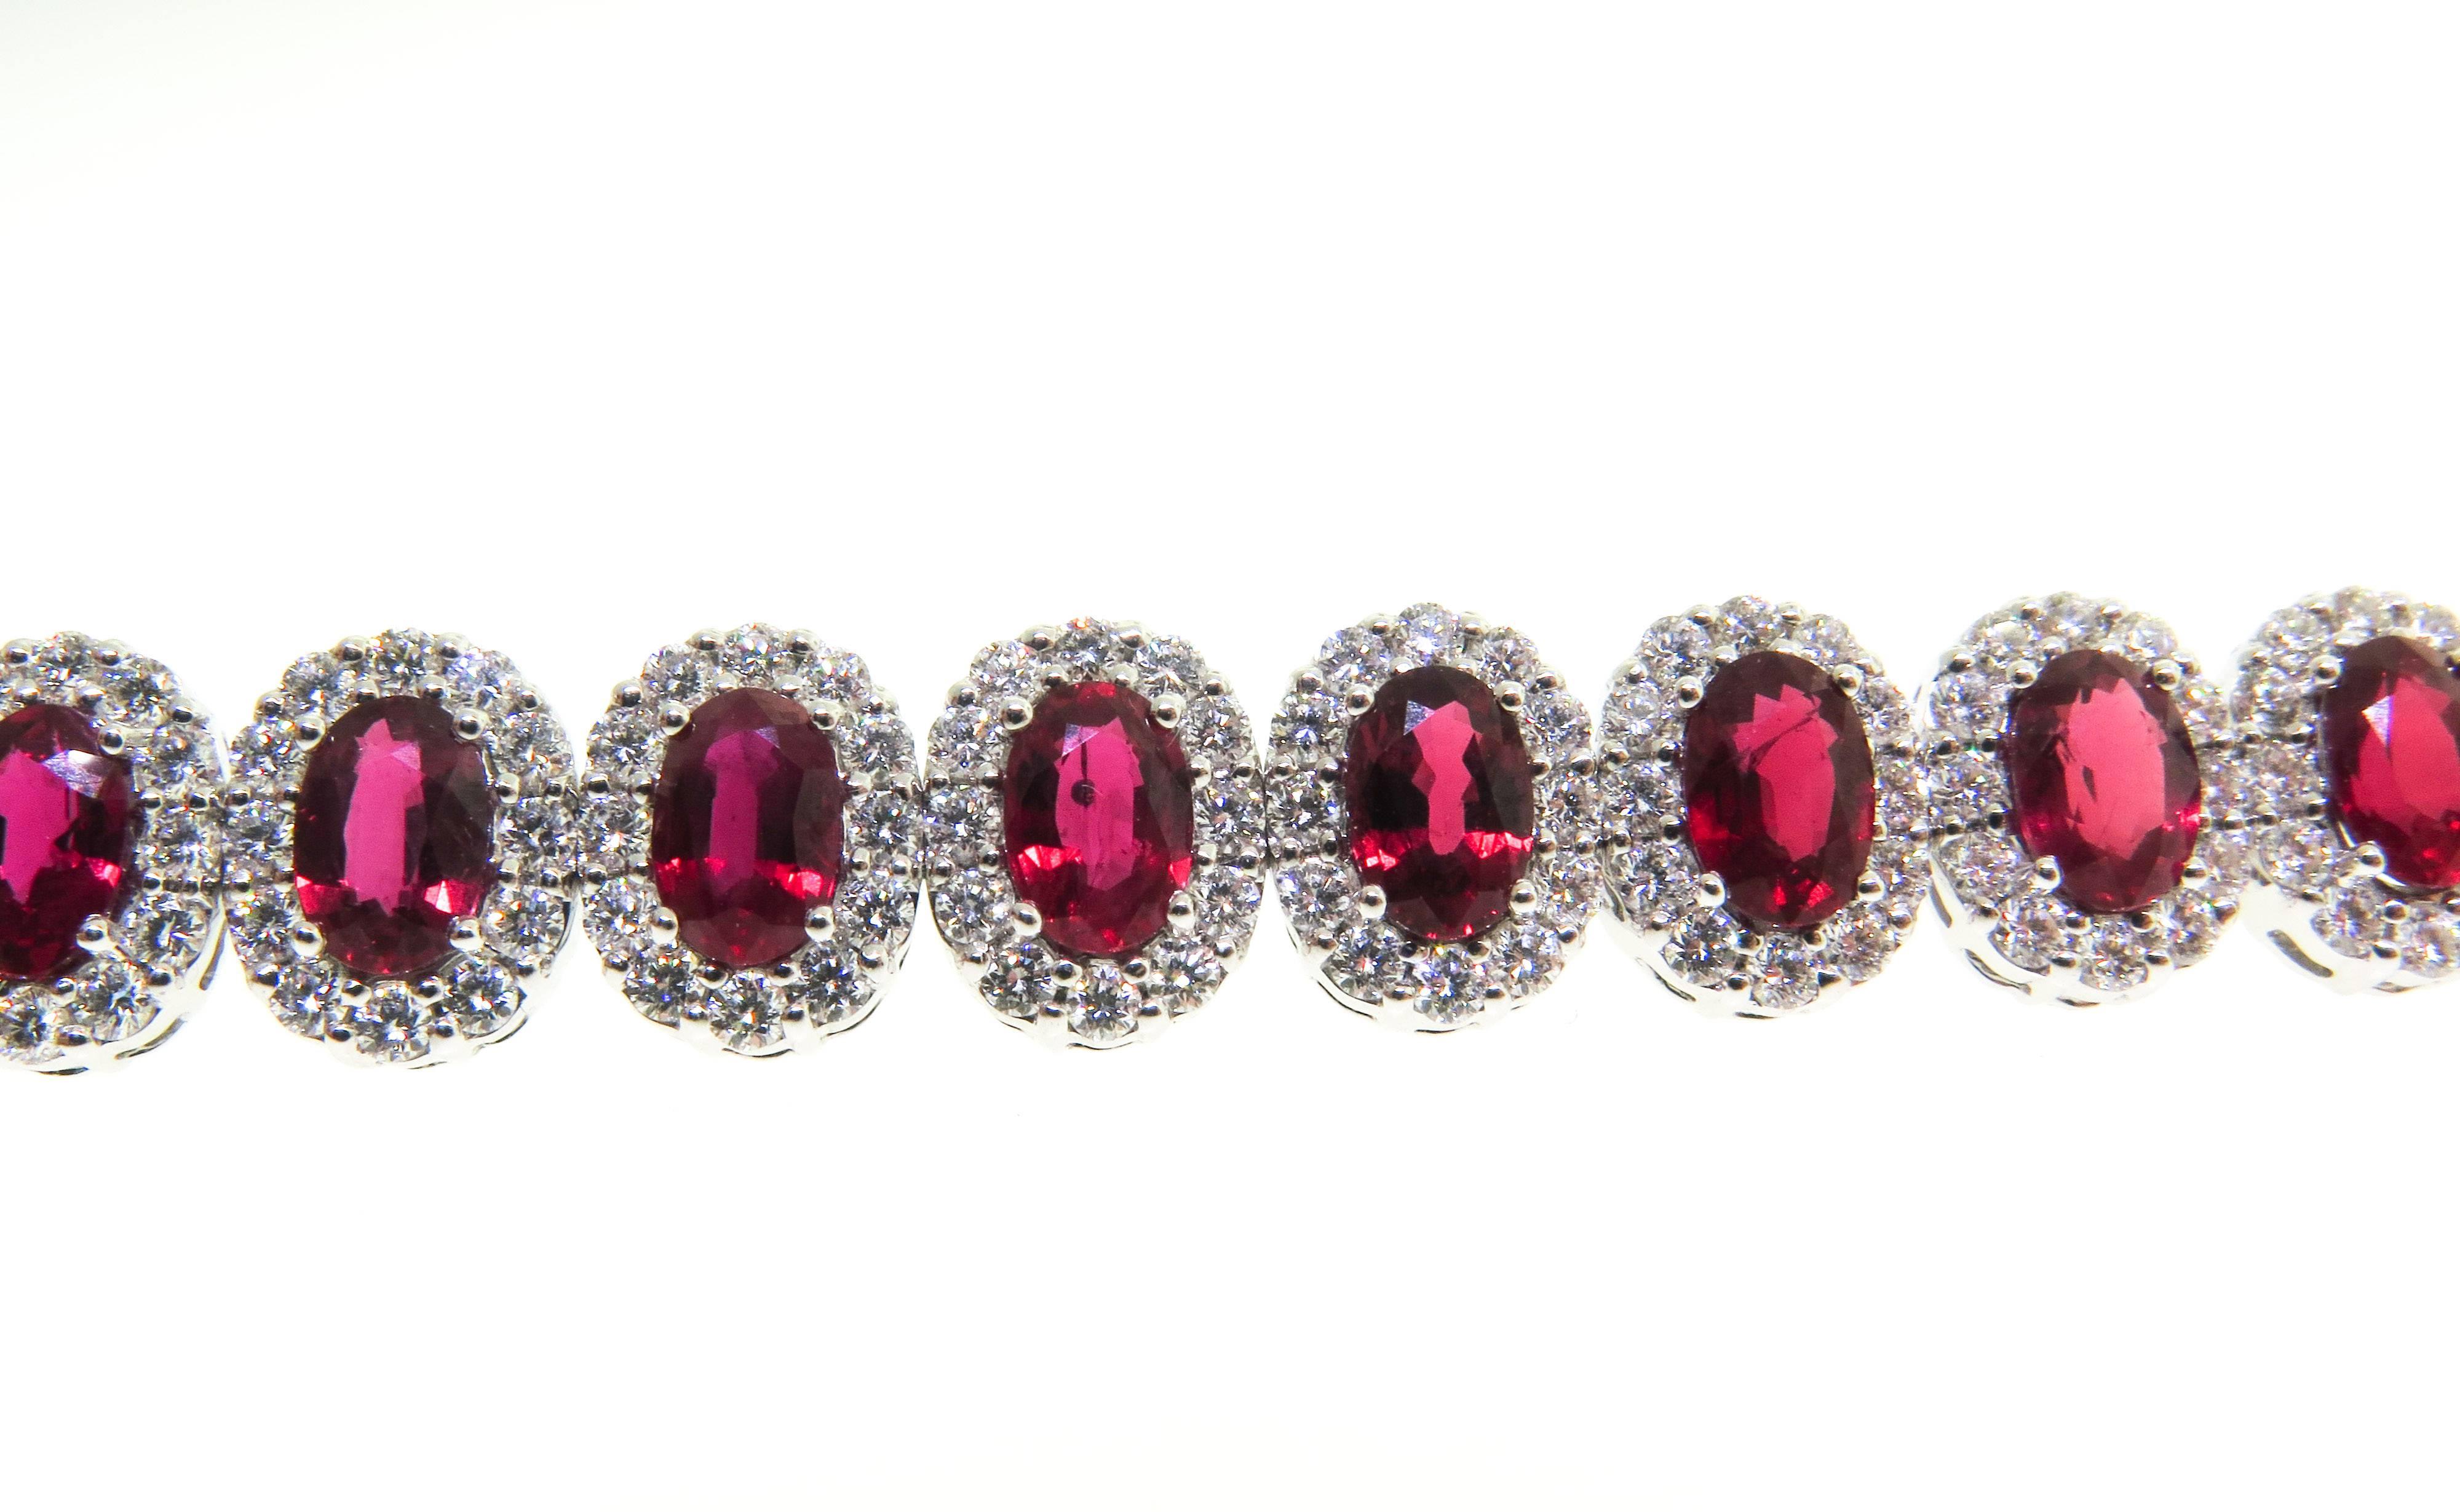 Stunning! This bracelet features 24 beautifully matched rubies, meticulously crafted in 18 karat white gold in the highest quality. Surrounded by white round brilliant cut diamonds. Ruby carat weight 14.18 total and 5.41 carat diamonds. Clasp melts